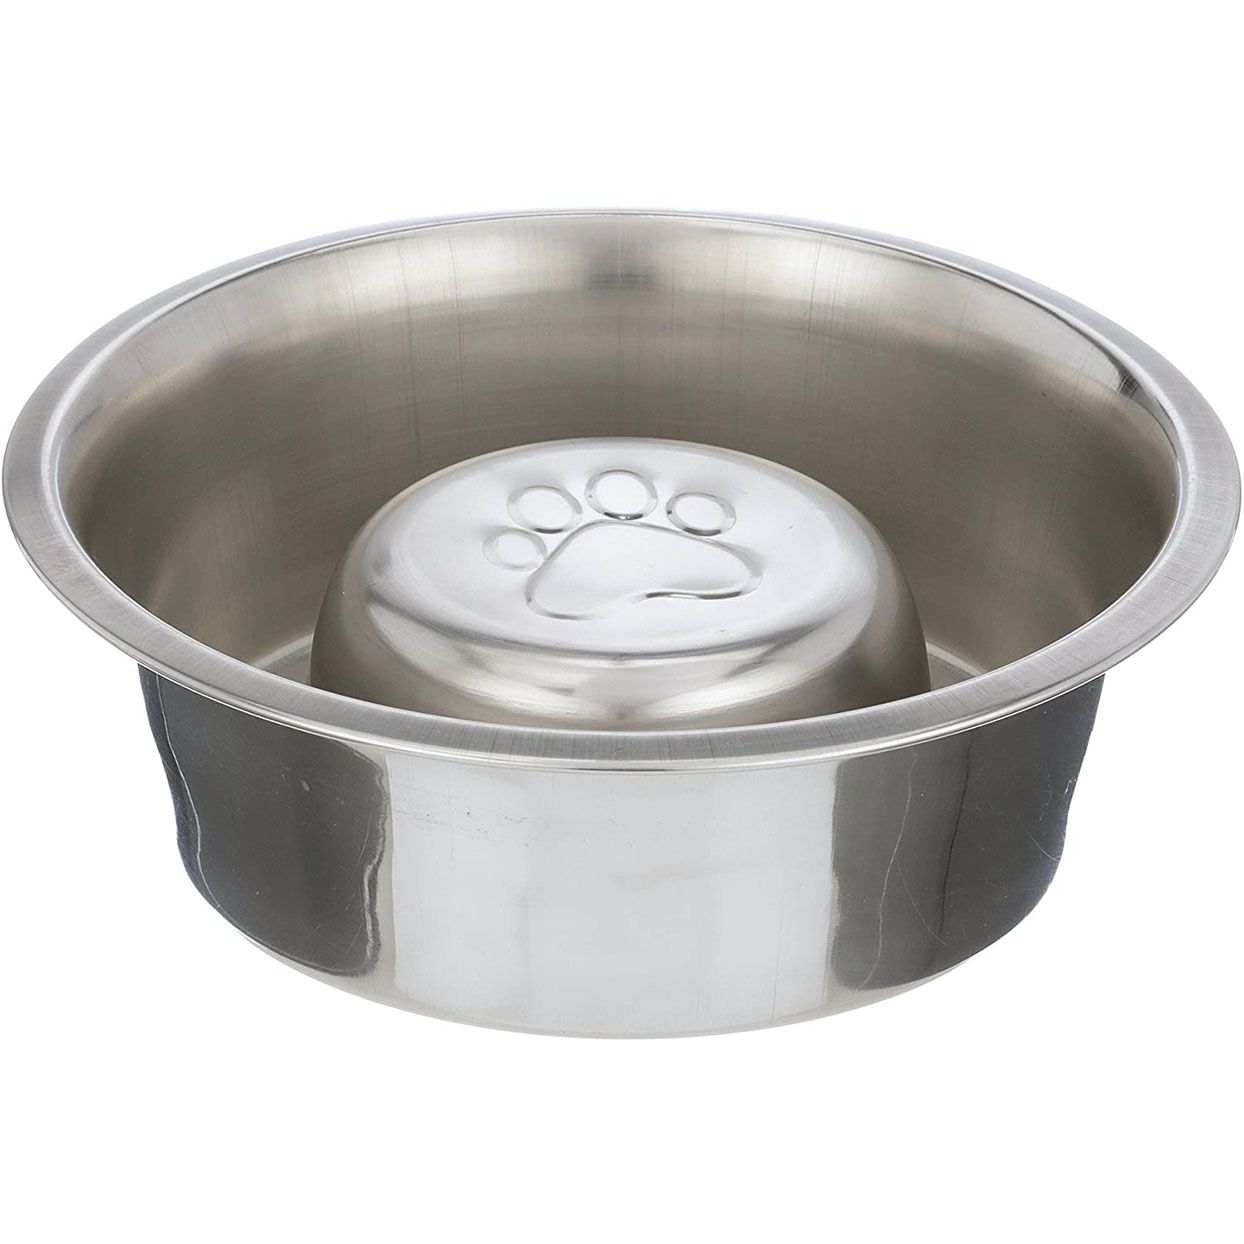 stainless steel slow feeder dog bowl